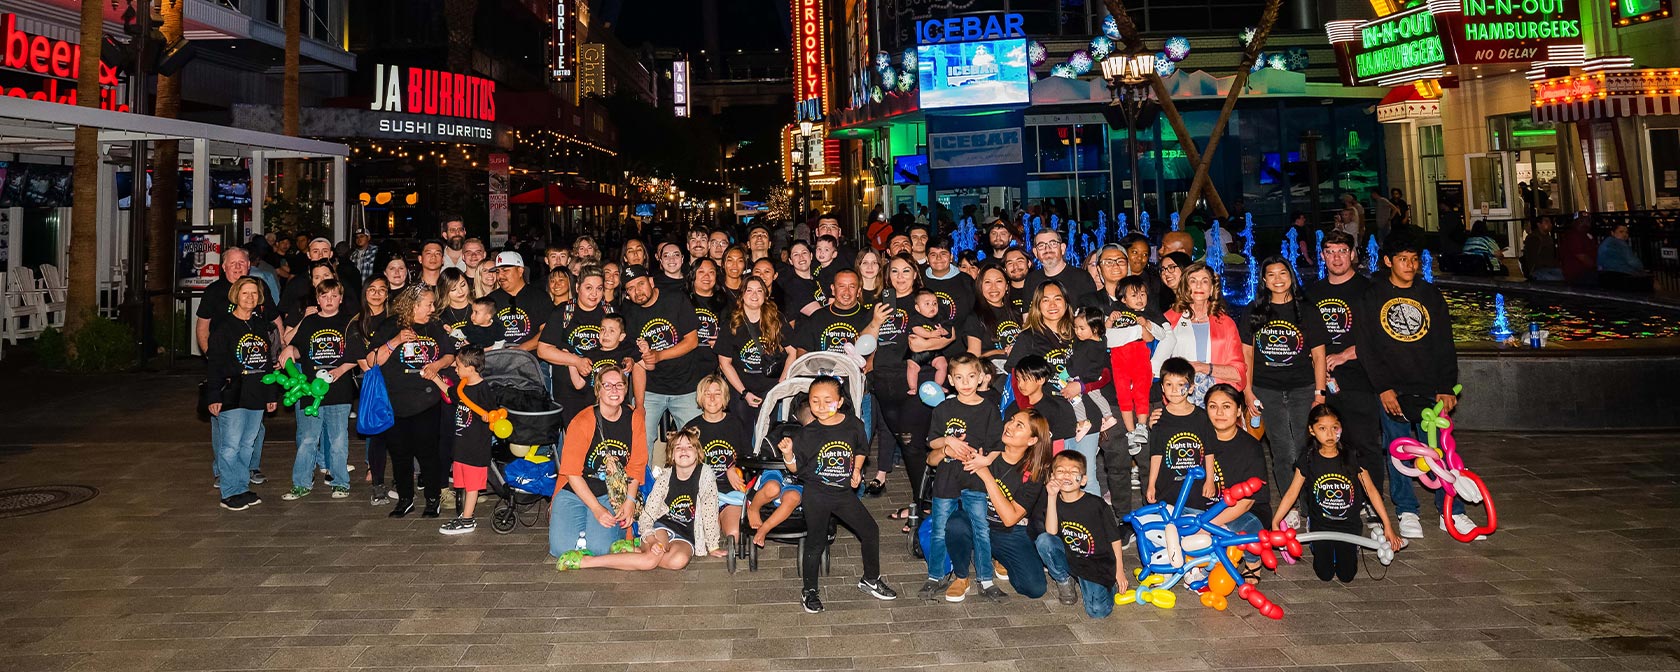 Families from the event gathered on the Linq promenade in front of the High Roller for a group photo.